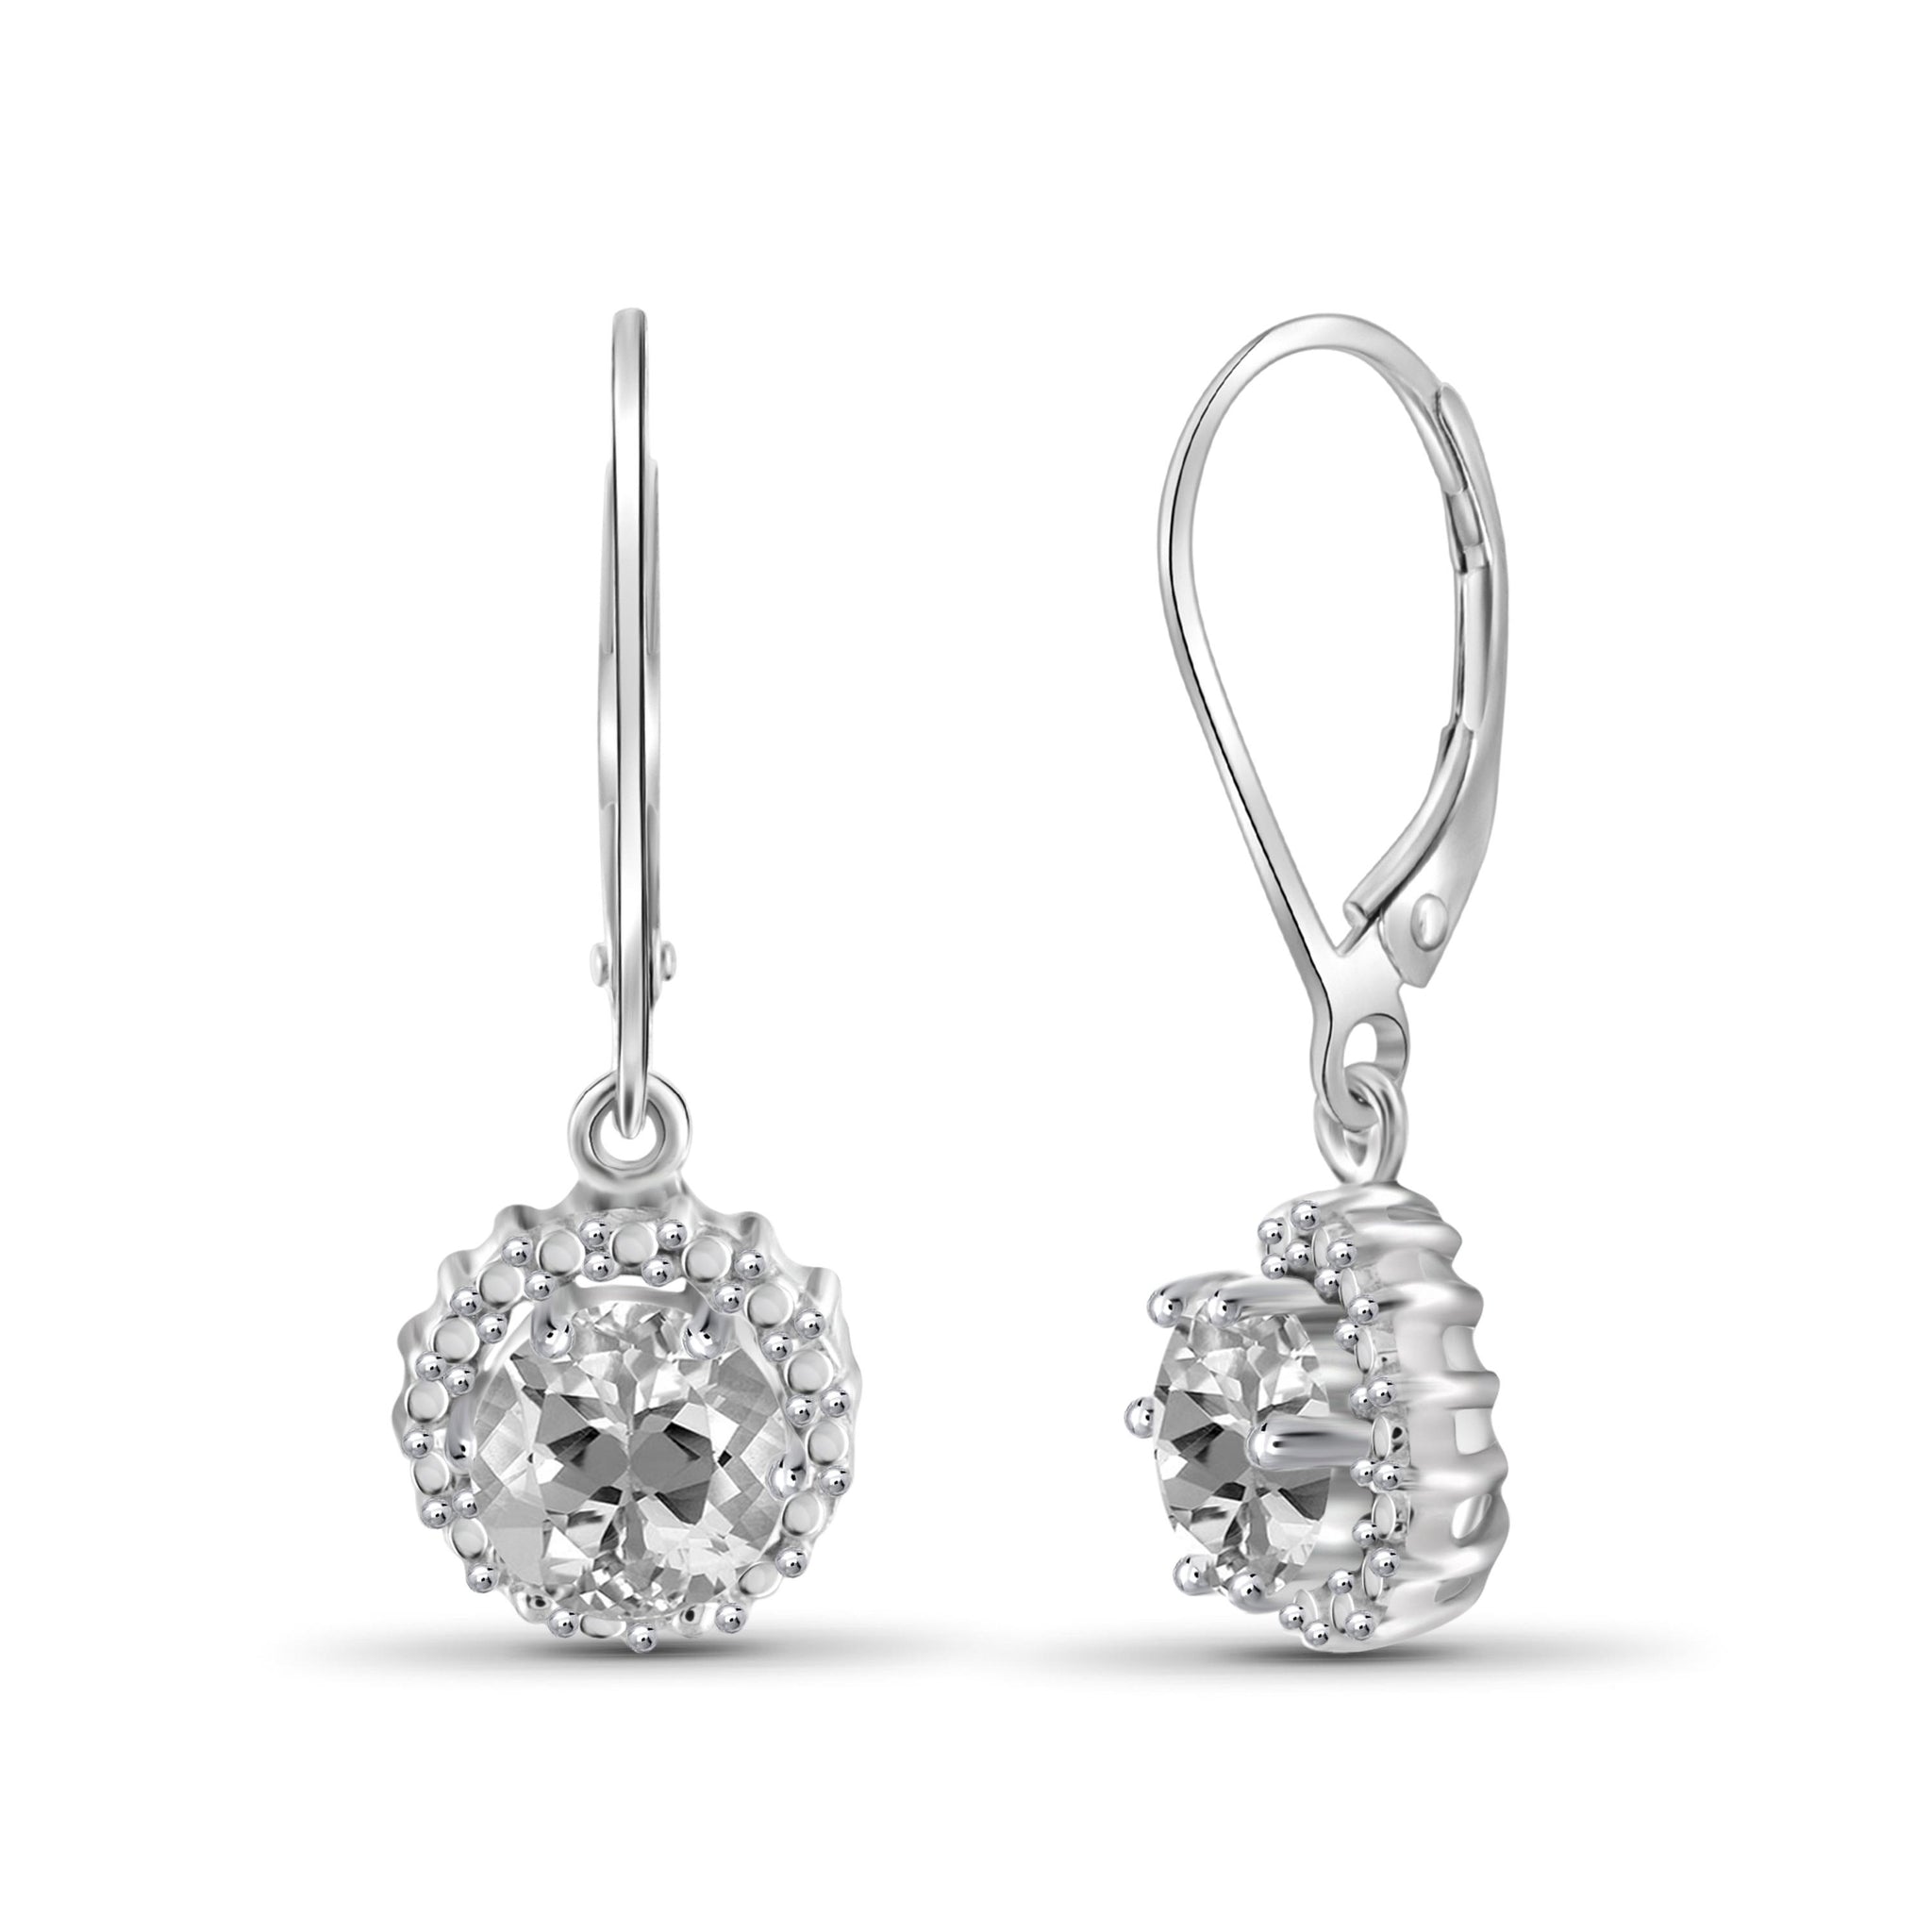 JewelonFire 1 3/4 Carat T.G.W. White Topaz And White Diamond Accent Sterling Silver Drop Earrings - Assorted Colors